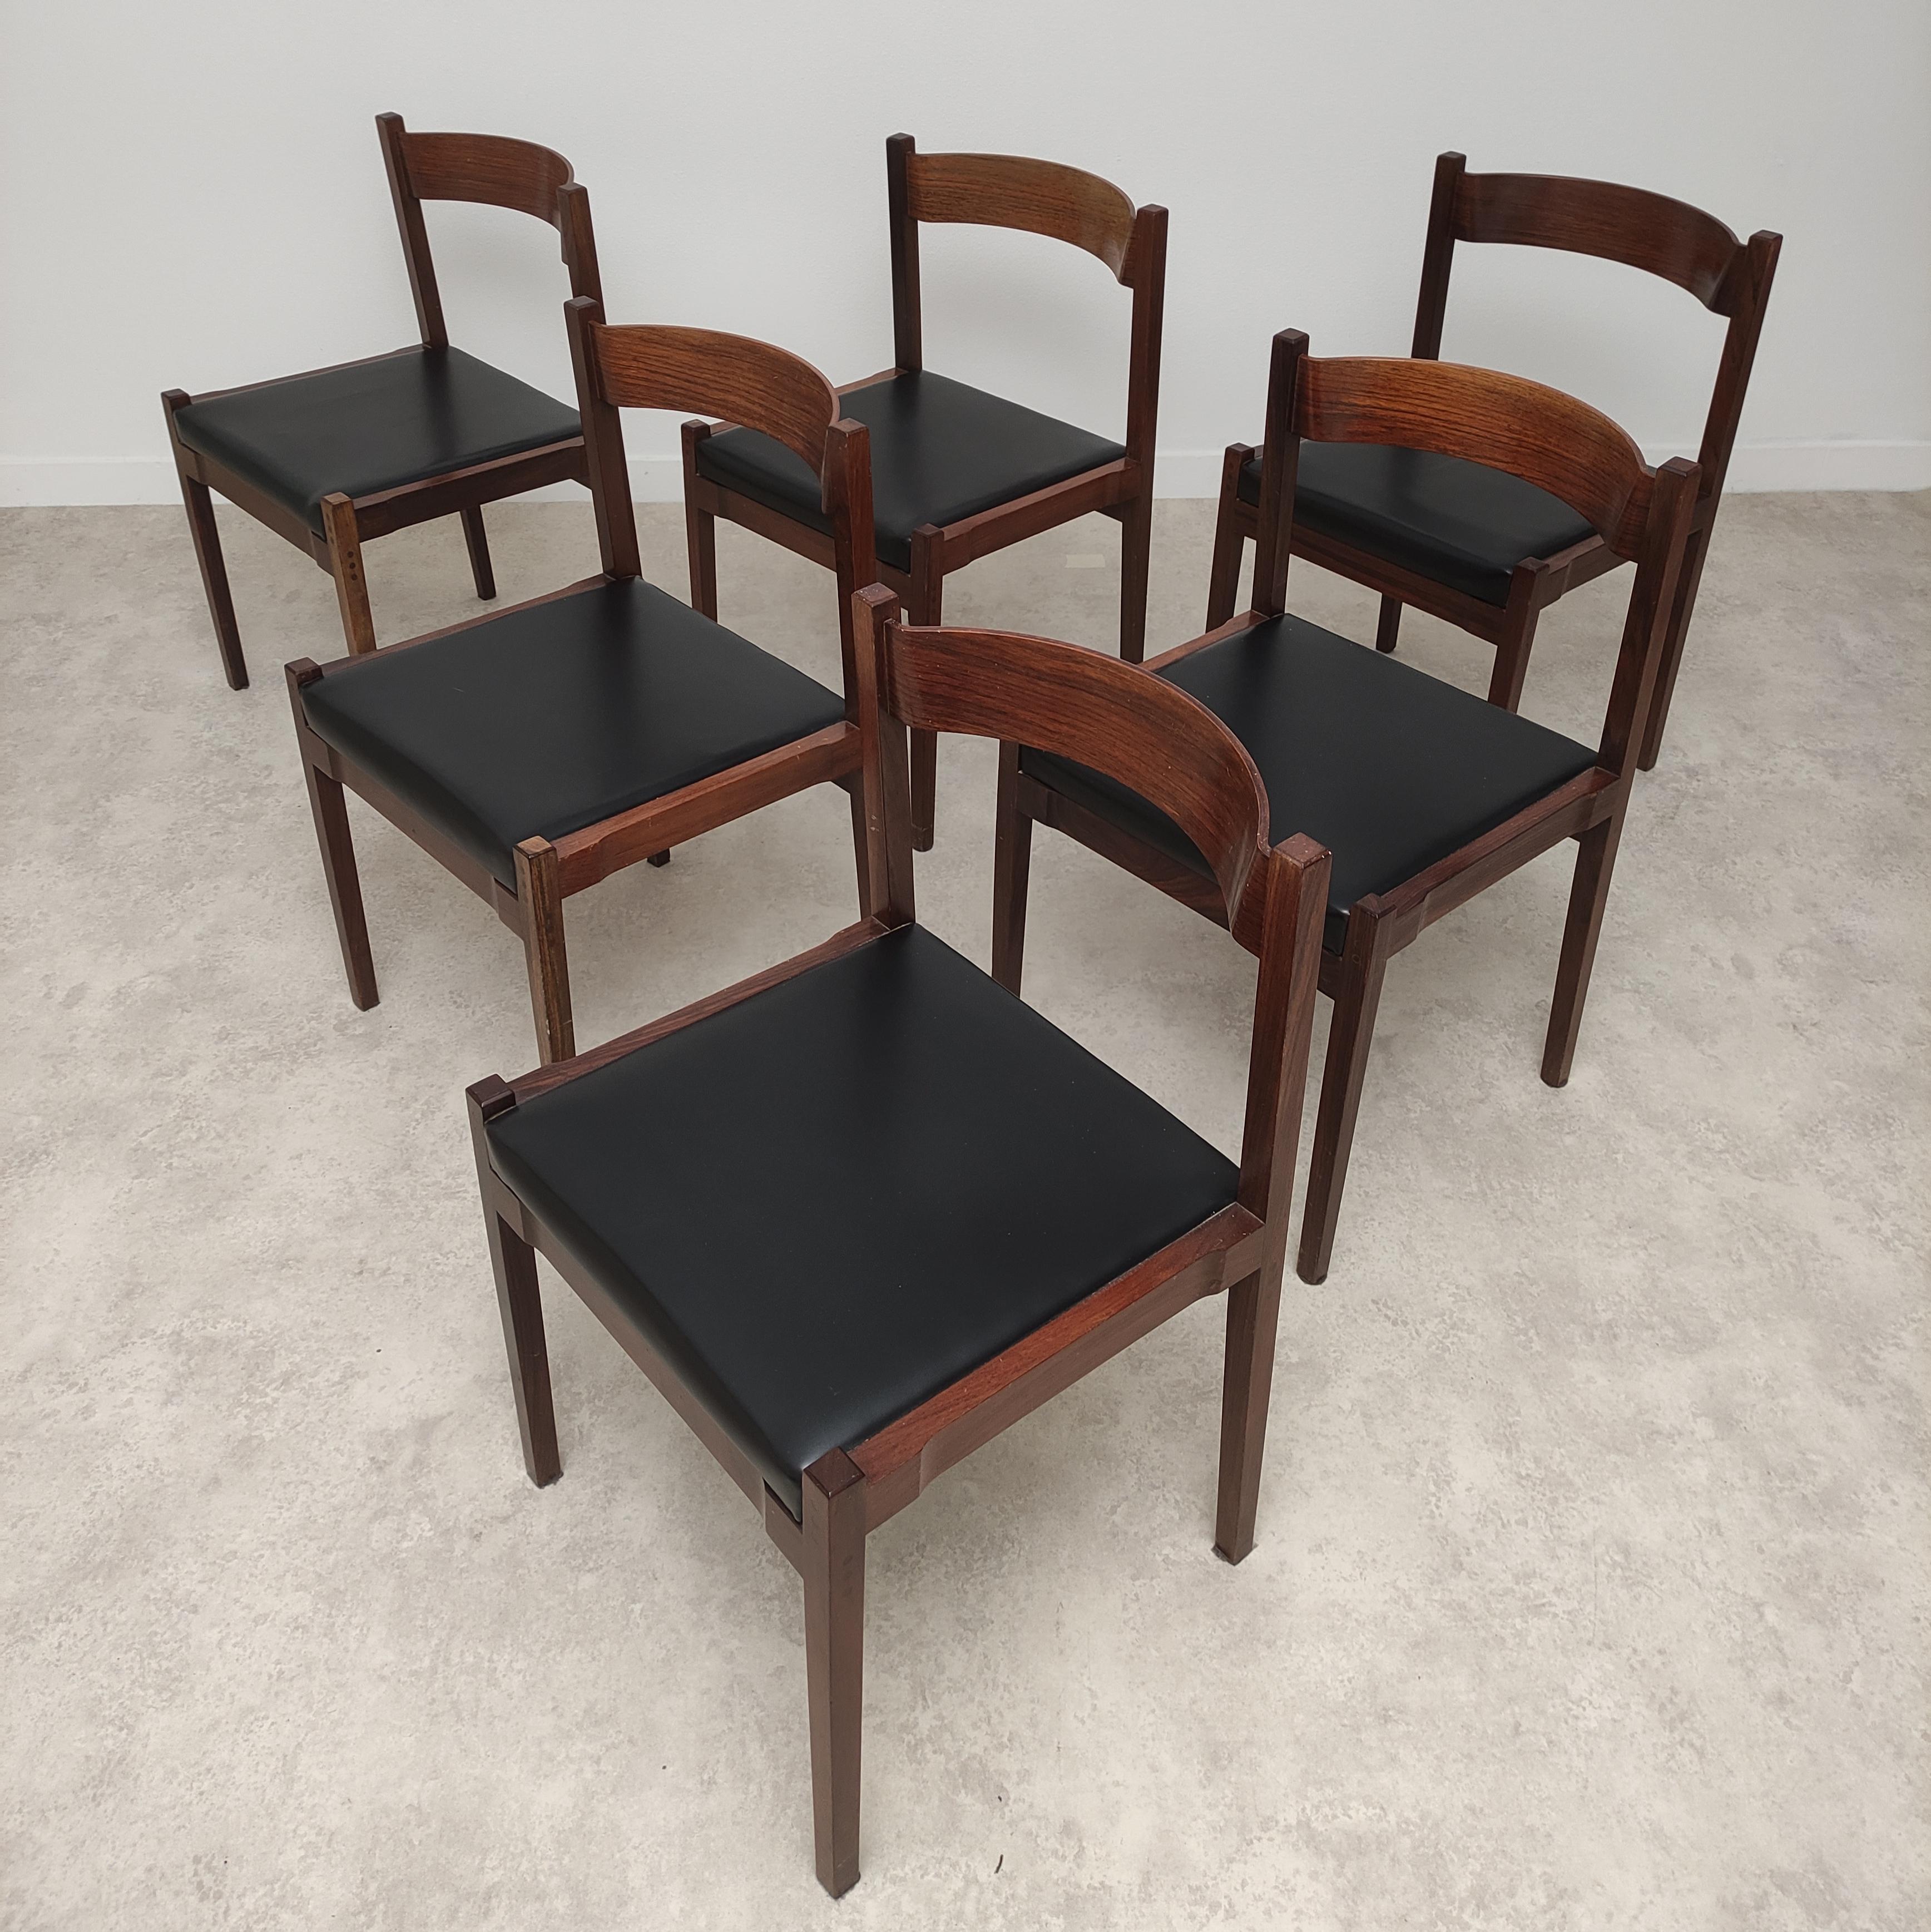 This Is a rare and elegant set of 6 Cassina mod.101 design in 1960 by Gianfranco Frattini.
This chair has a refined design Classic as italiano style but with Amazing details that came unique and gorgeous for your living Room.
This chair Is in